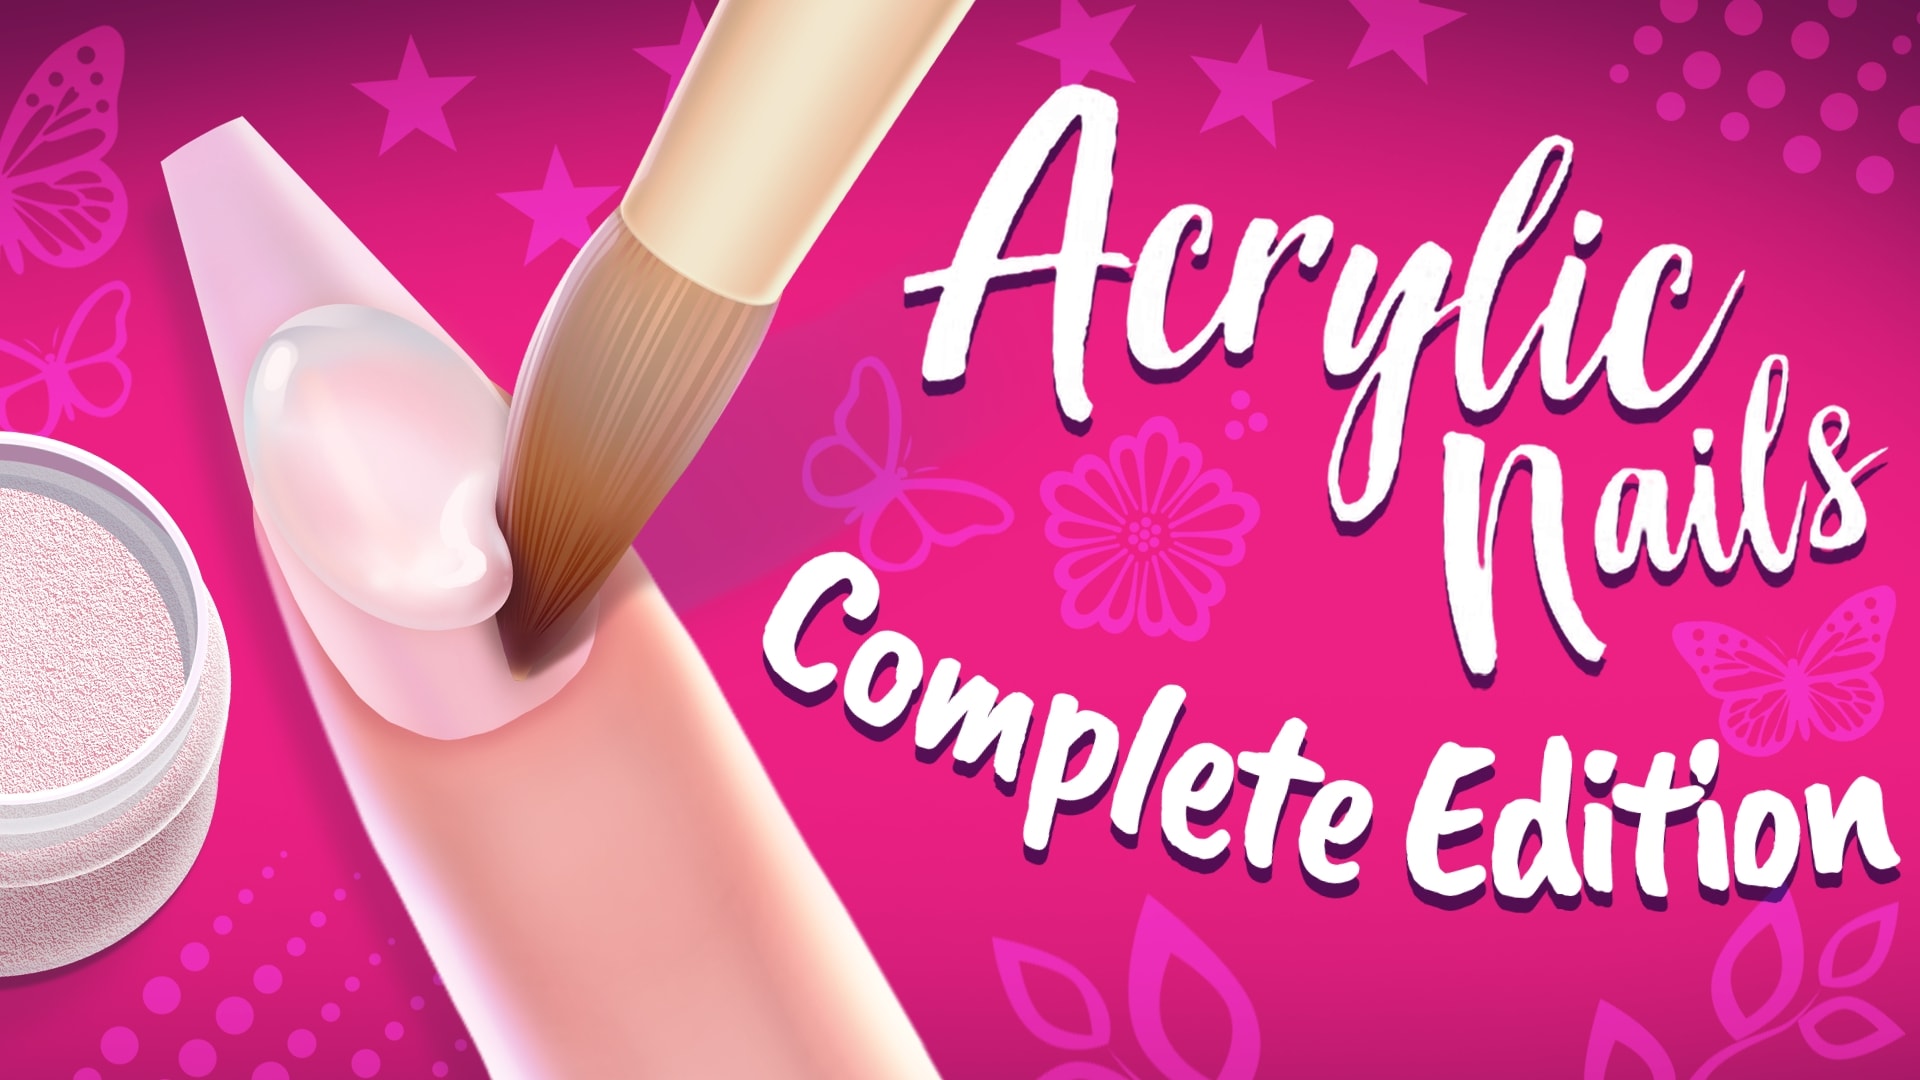 Acrylic Nails!: Complete Edition